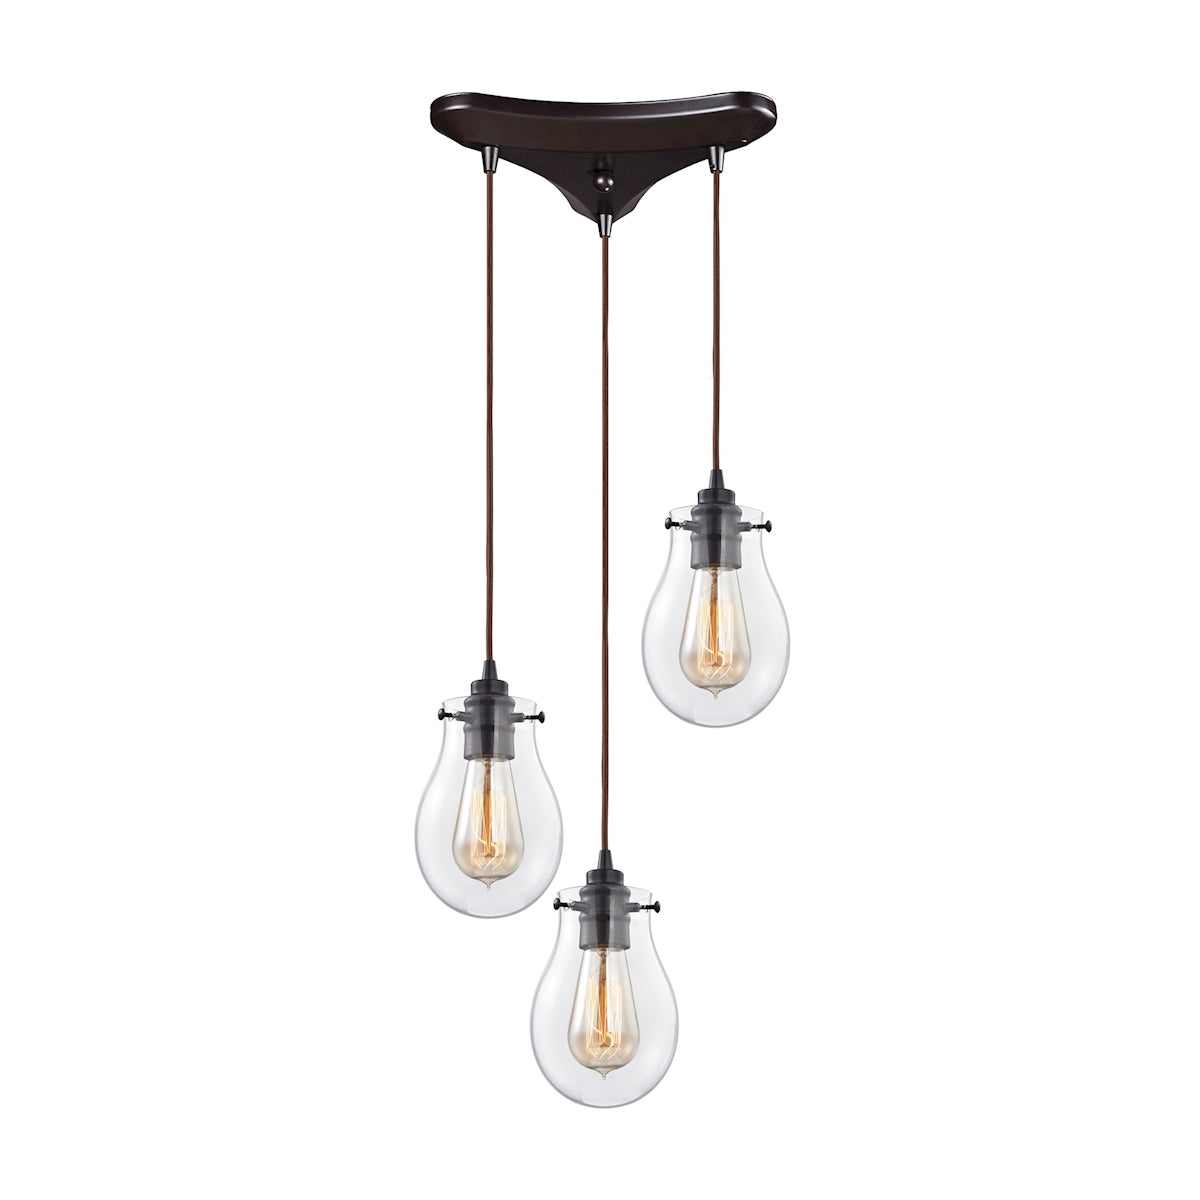 ELK Lighting 31934/3 Jaelyn 3-Light Triangular Pendant Fixture in Oil Rubbed Bronze with Clear Glass